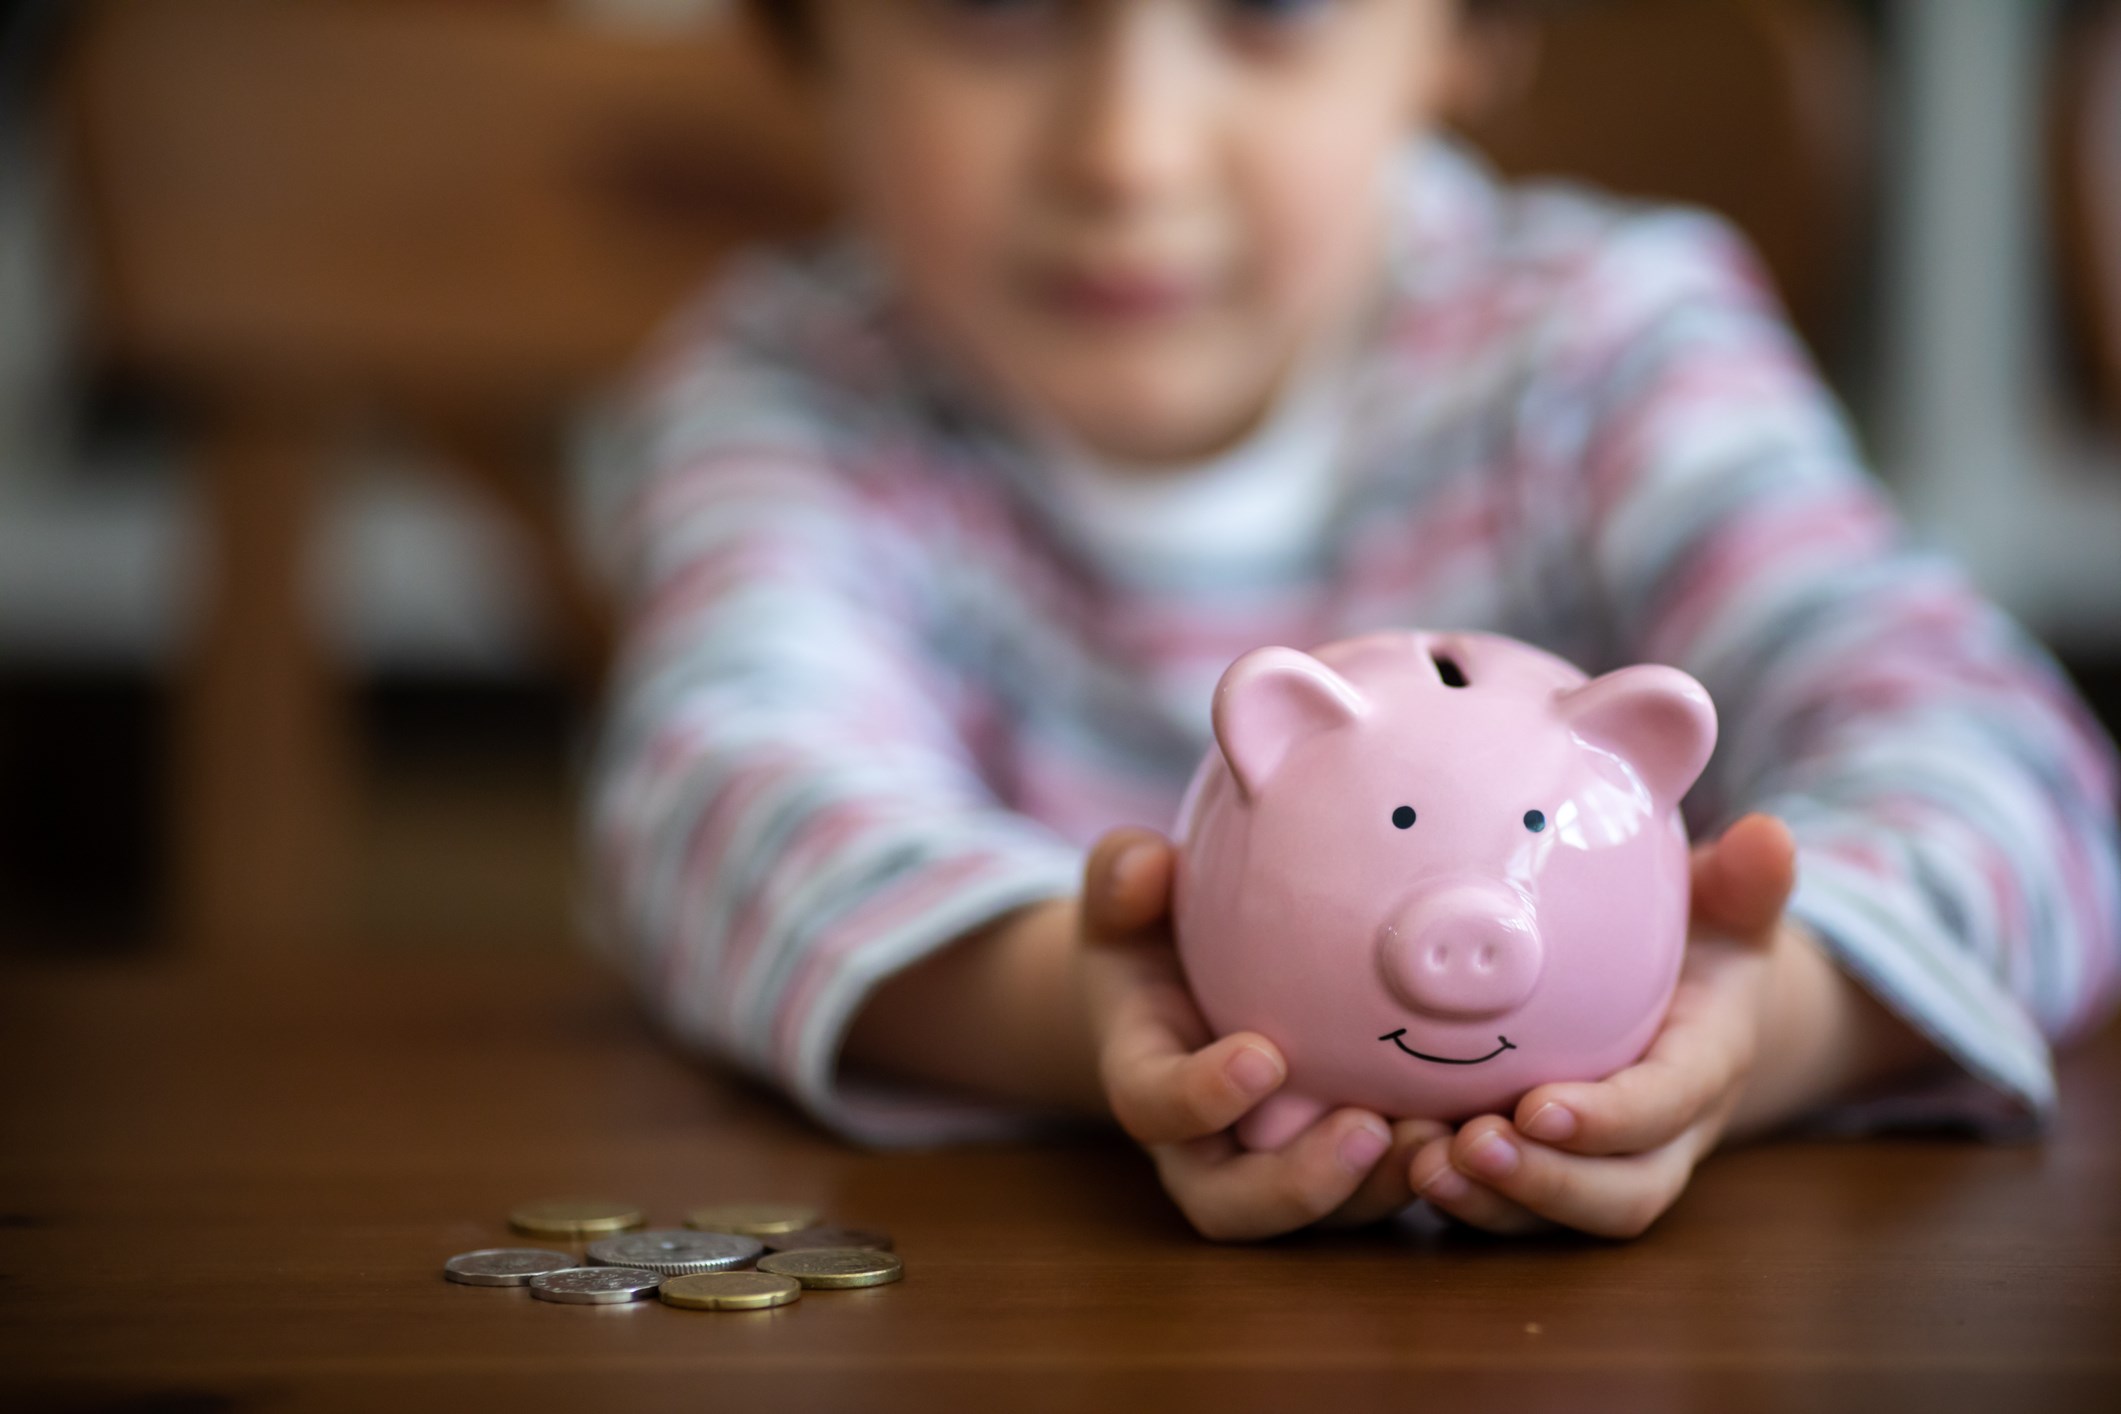 Child holding a piggy bank, coins on a table